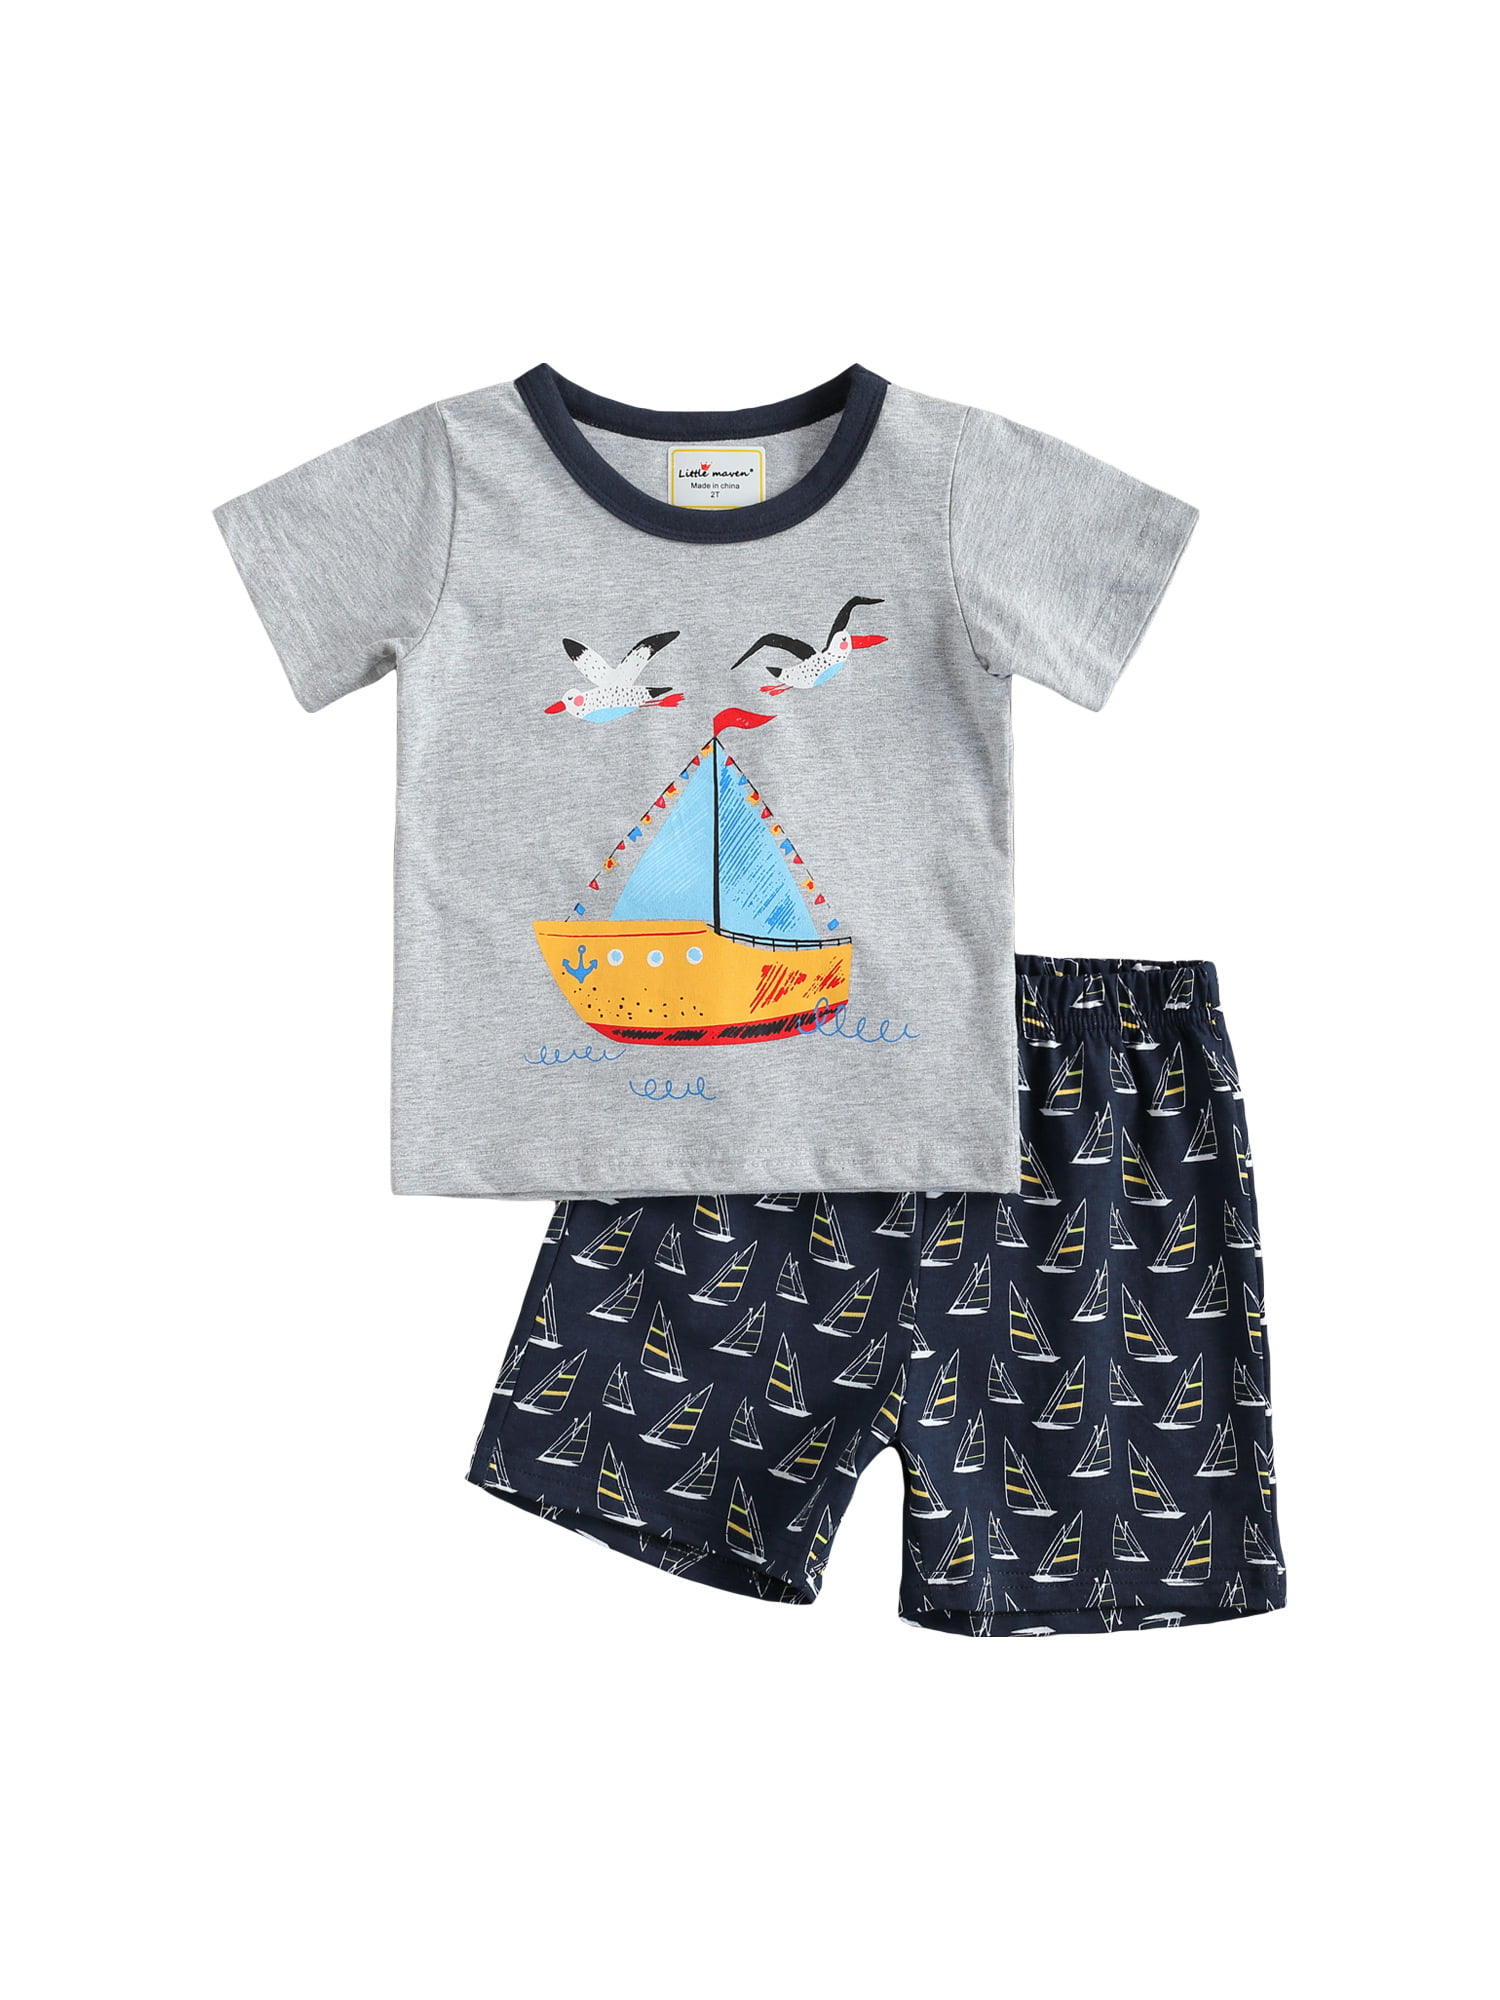 Details about   Baby Boys Clothes Kids Fashion Jumpsuits Printed Shorts Kids Clothes Summer Suit 